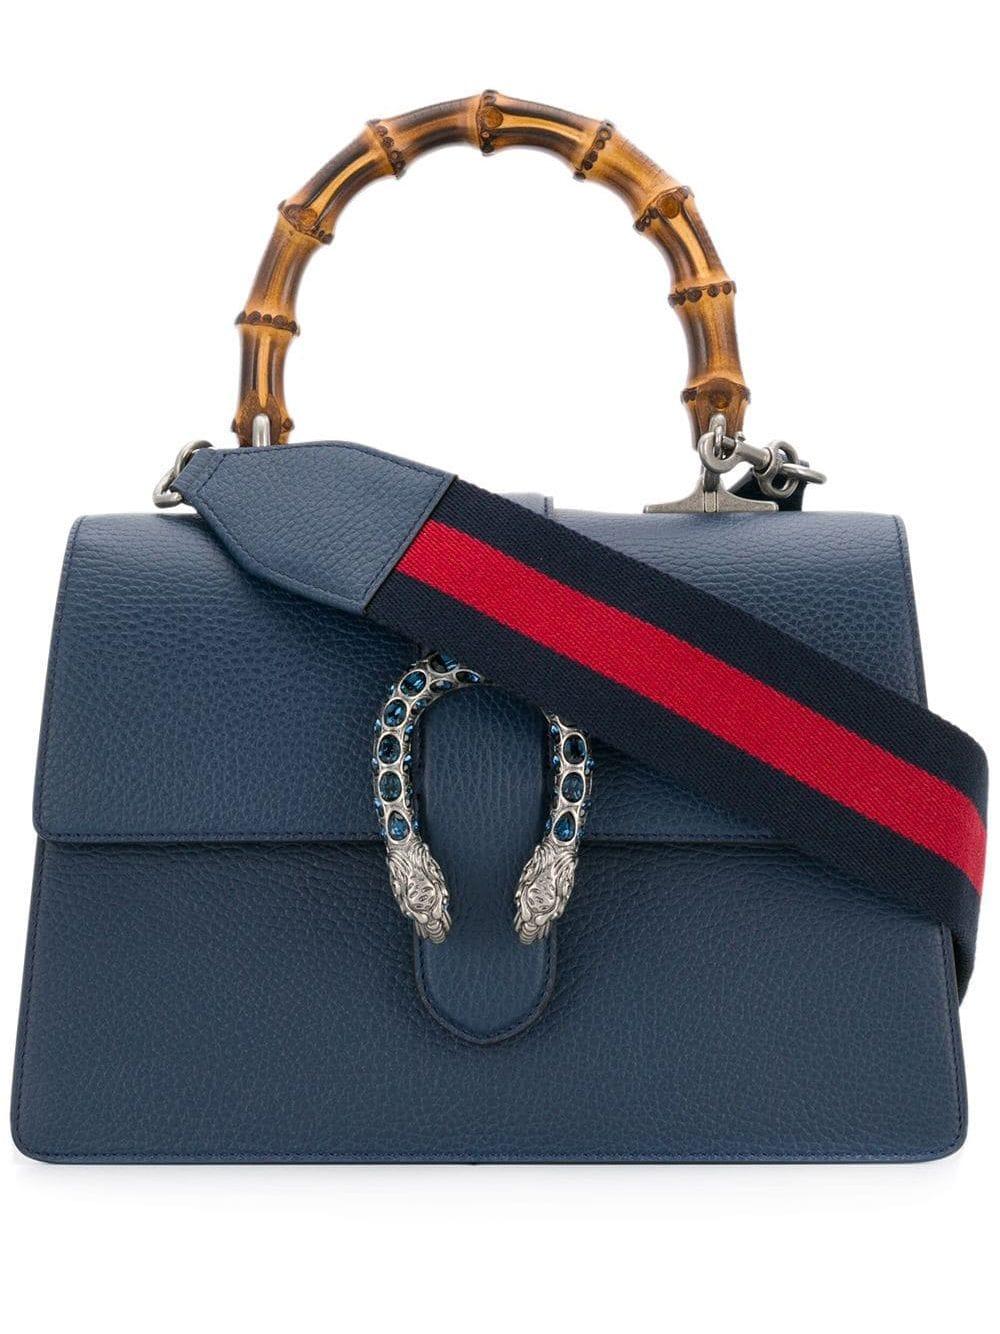 Gucci Dionysus Bamboo Tote in Blue | Lyst